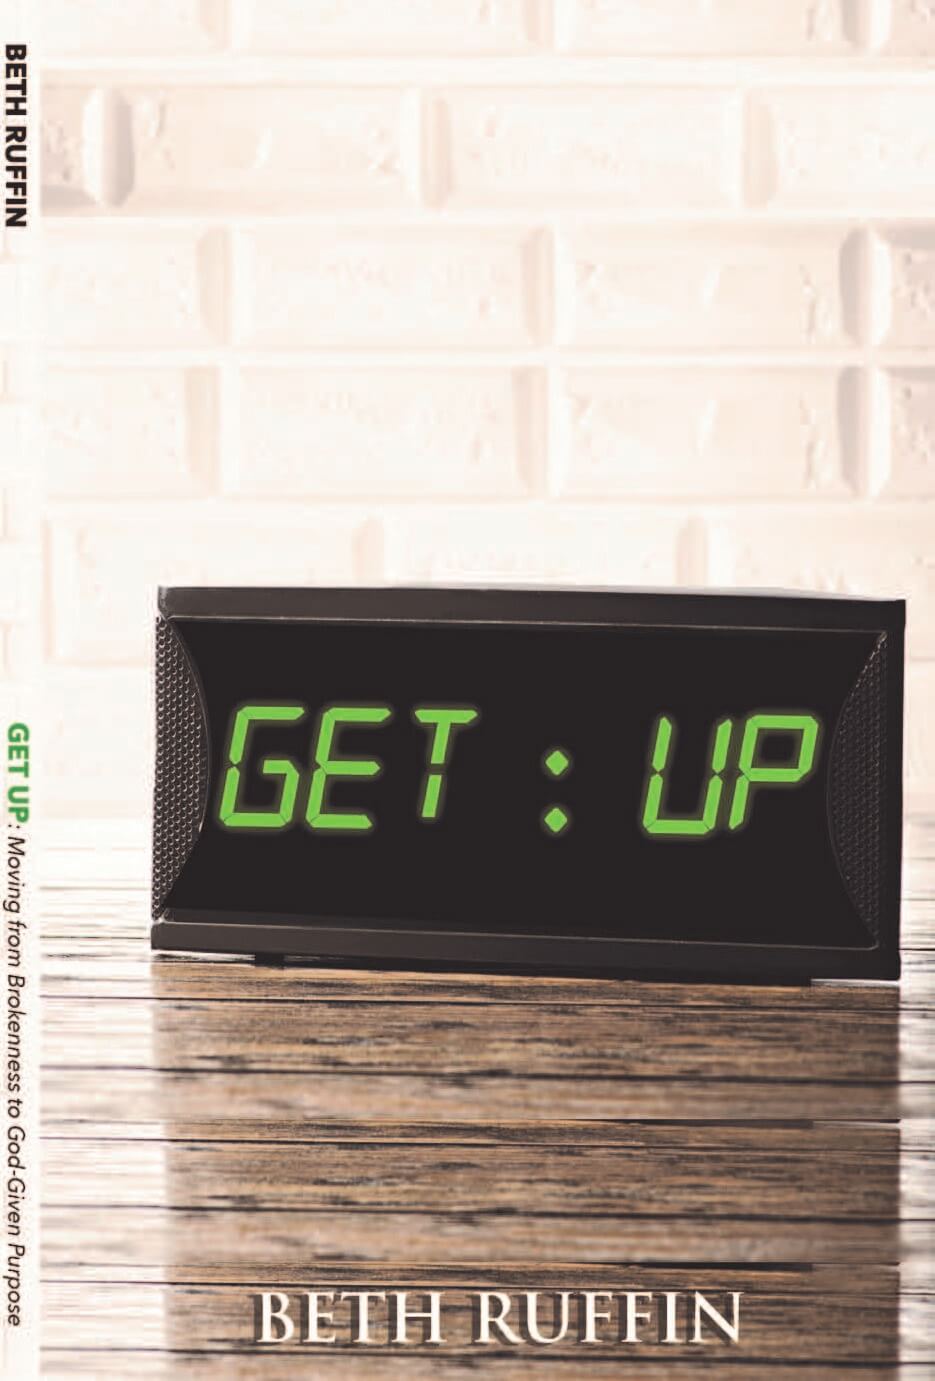 A book titled "GET UP: Moving from Brokenness to God-Given Purpose" by Beth Ruffin, with a digital alarm clock design.